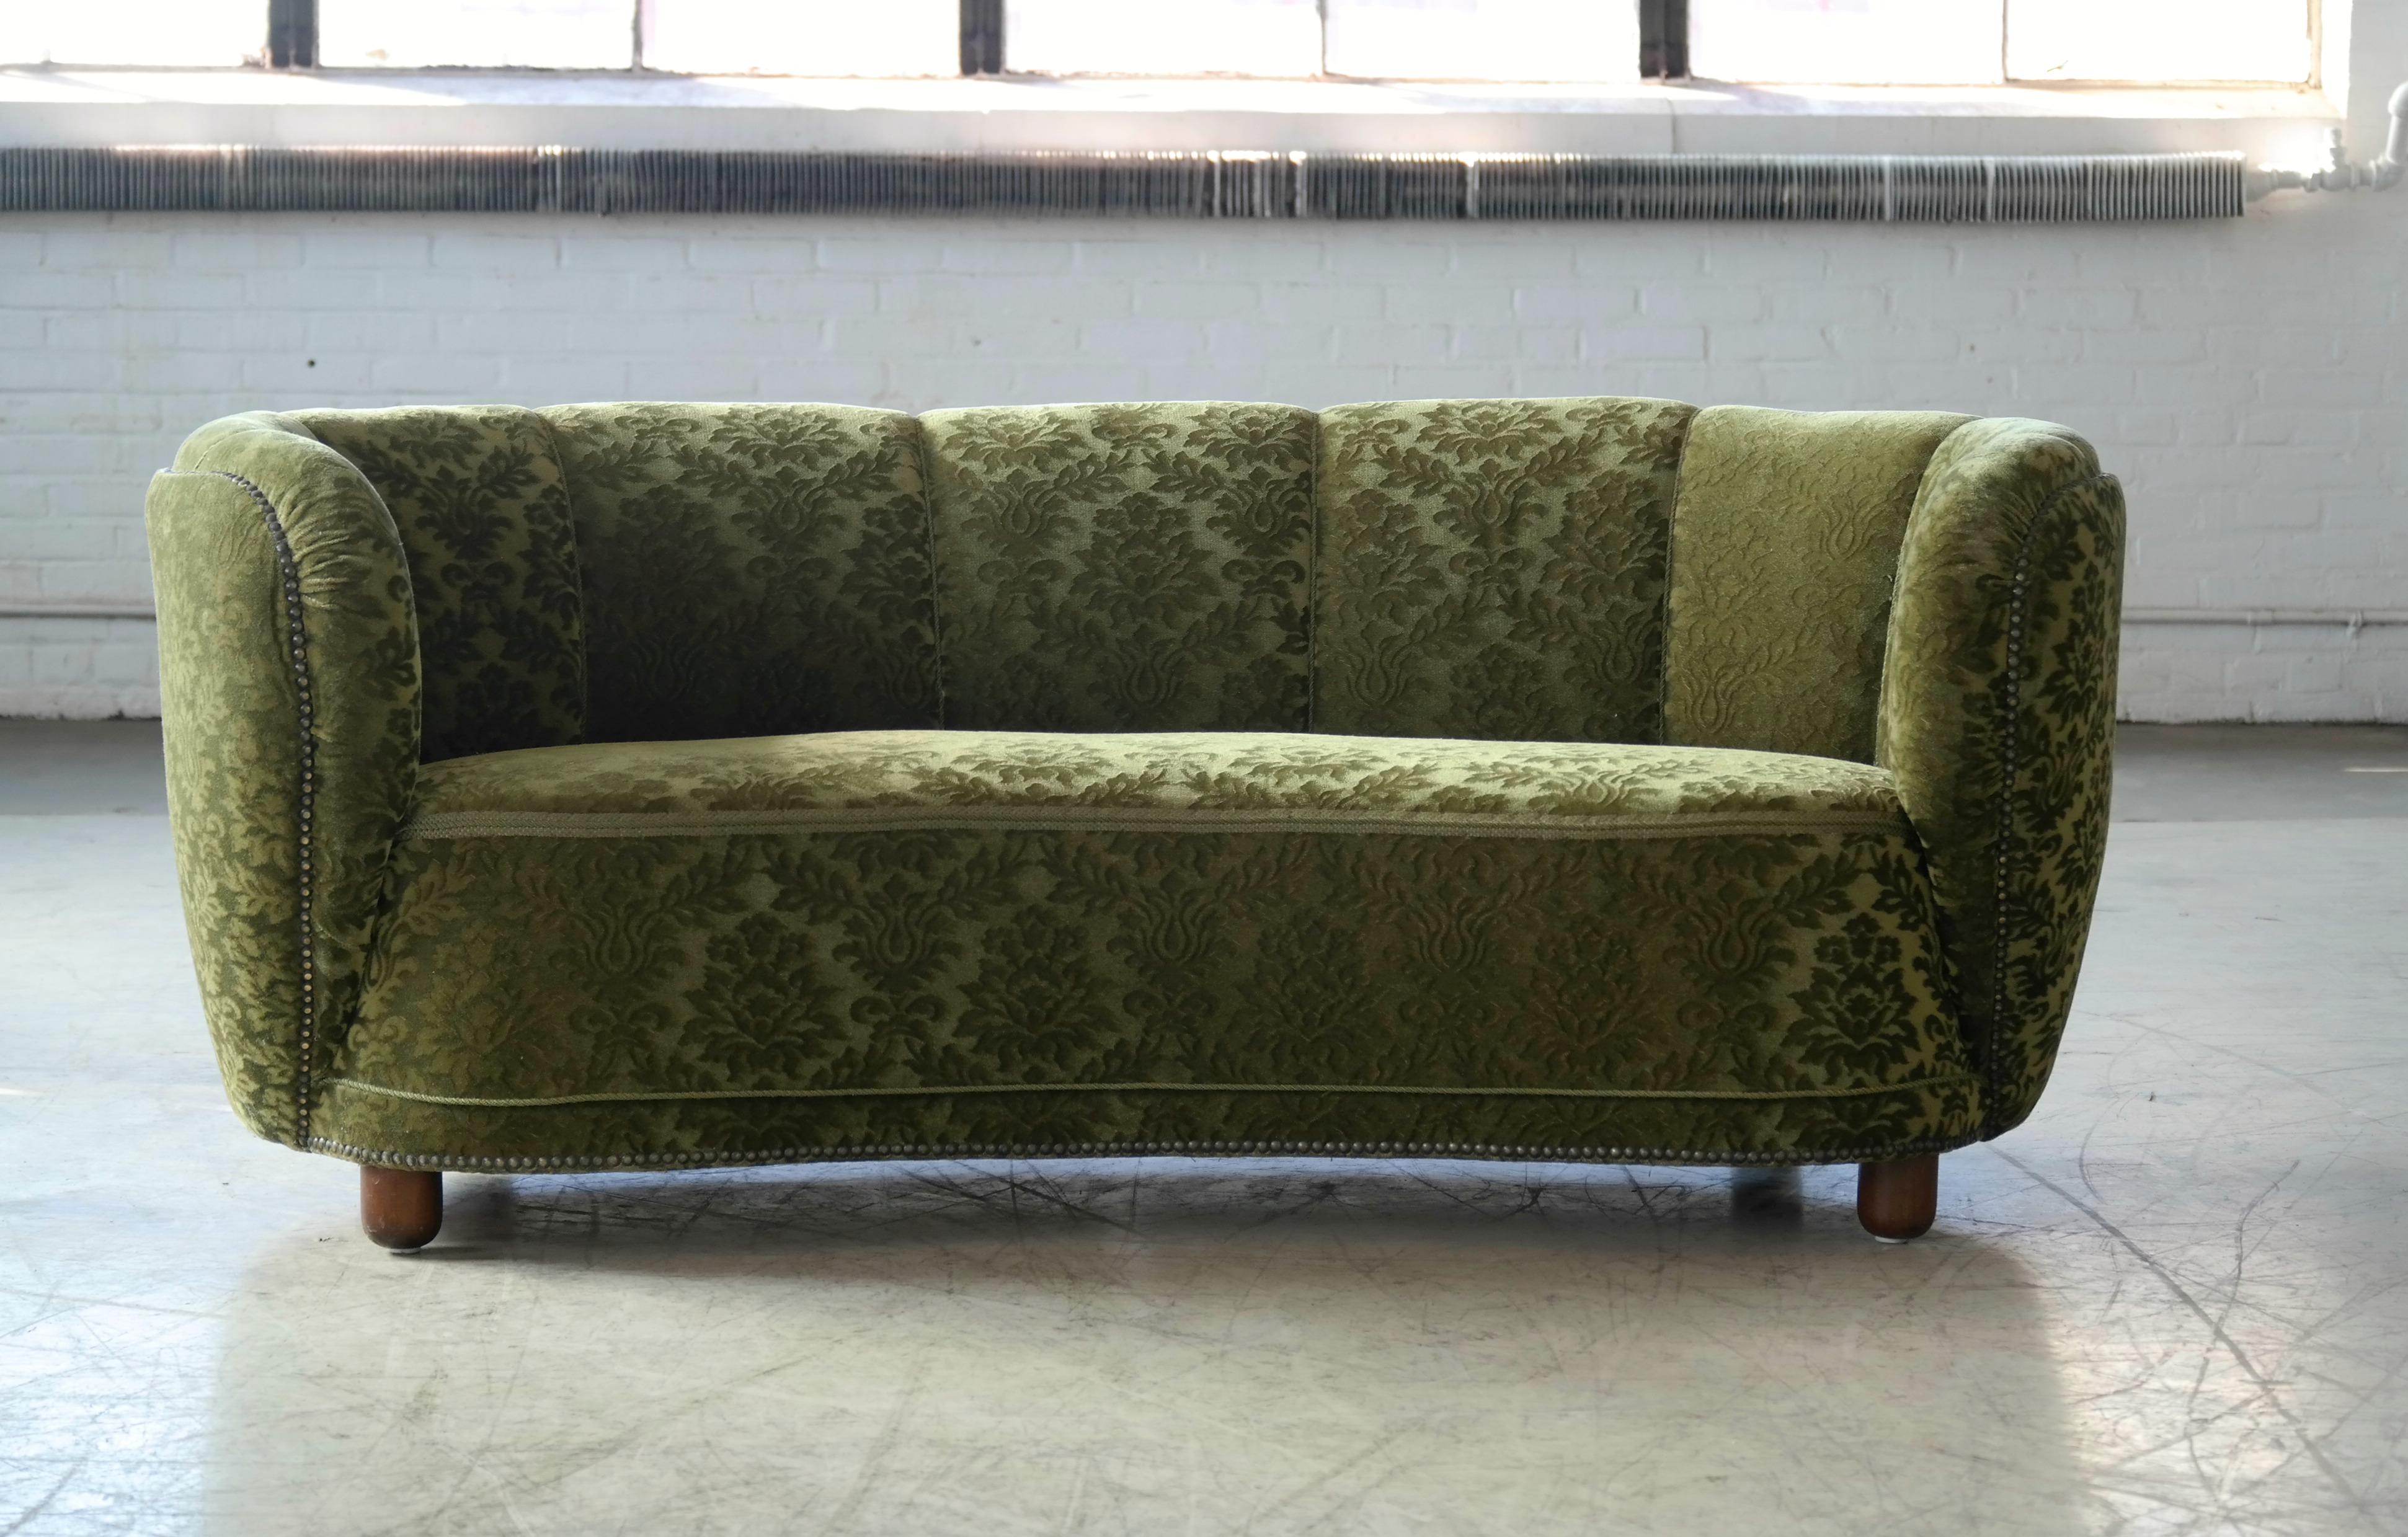 Beautiful and very elegant 1940s curved three-seat sofa in green velvet fabric. The sofa has springs in the seat and the backrest and the cushions are nice and firm and the sofa very sturdy. The sofa has been re-upholstered in the past and the